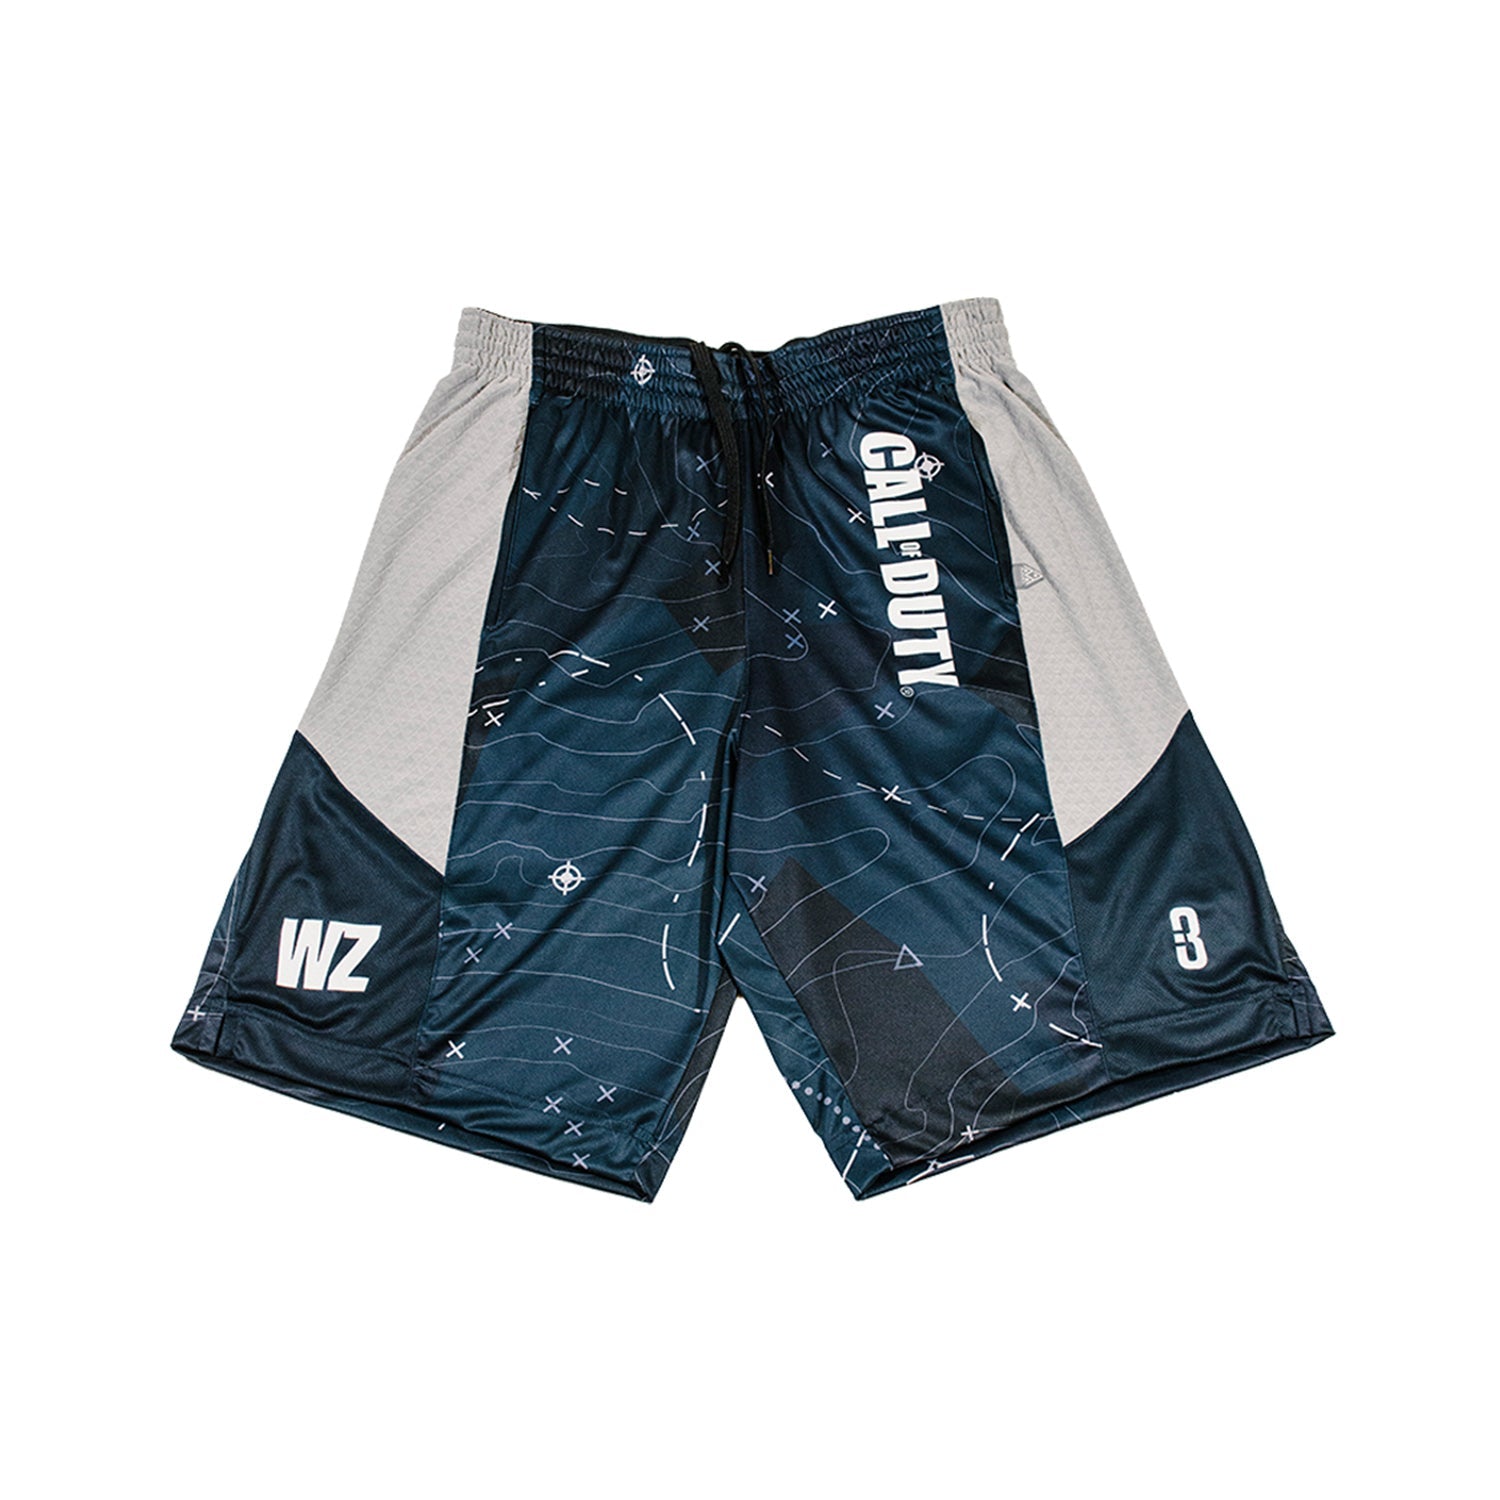 Call of Duty Point3 Blue Topographic Shorts - Front View